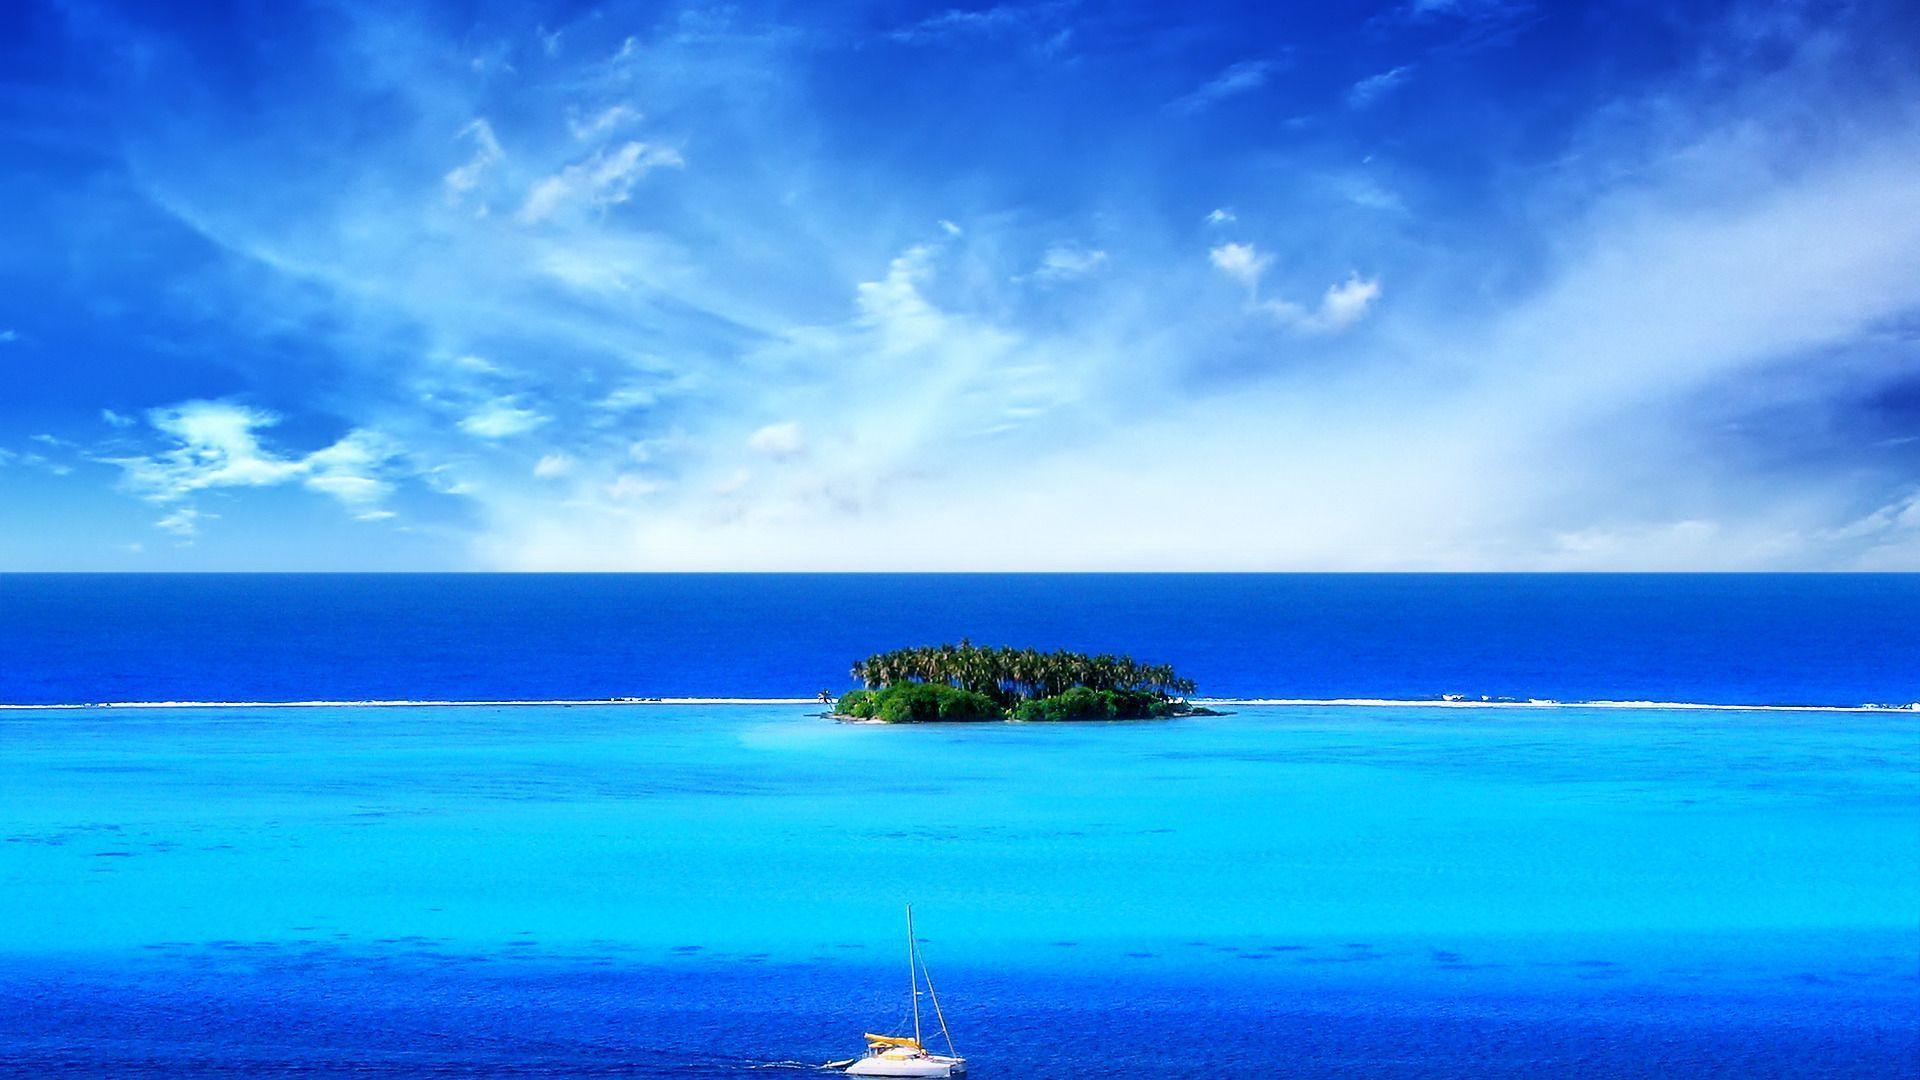 Hd Perfect Isl On Outer Reef Wallpaper Download Free 1920x1080PX